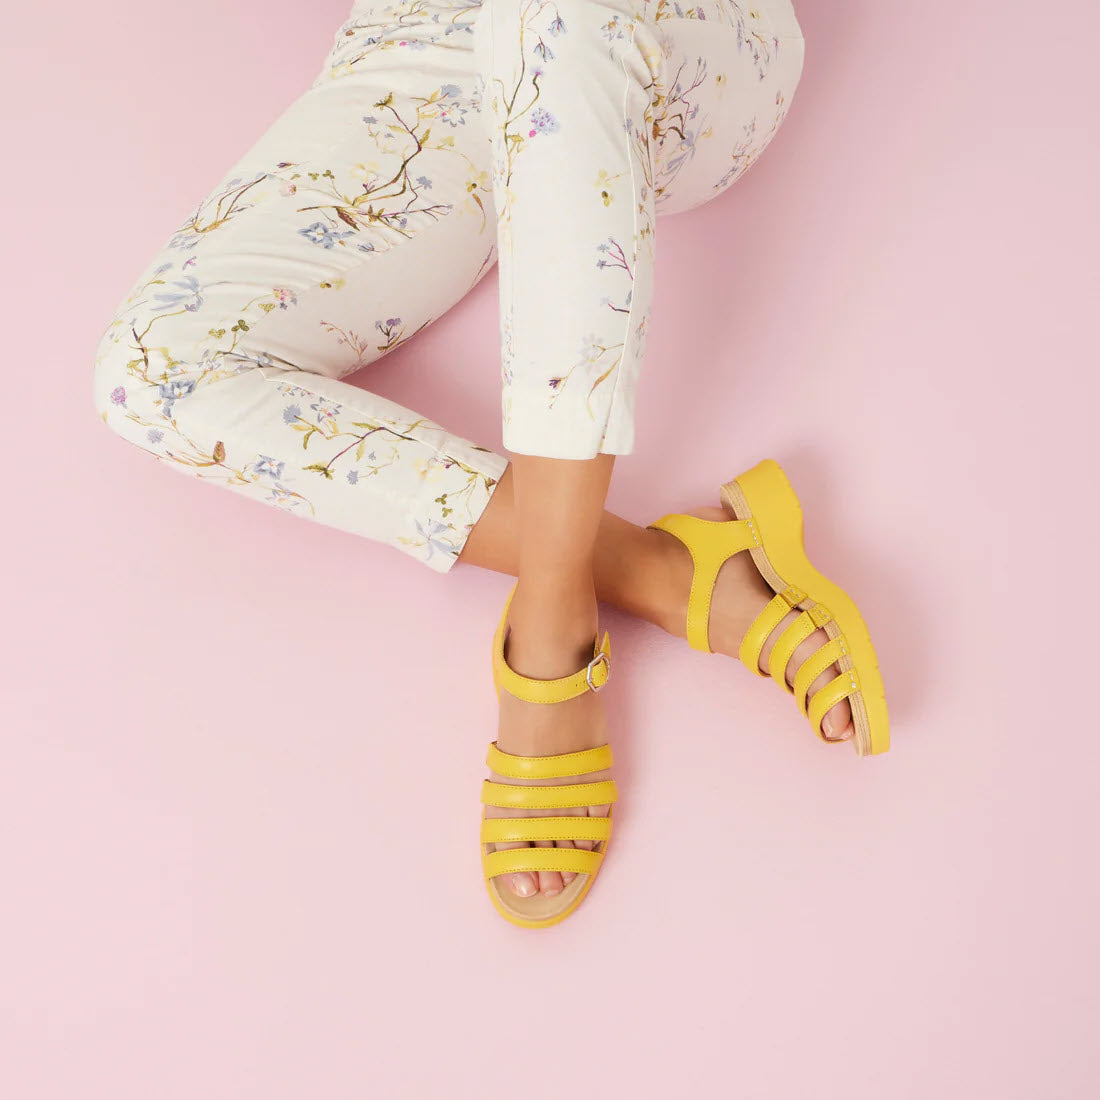 Person wearing Dansko Roxie Yellow sandals with straps and floral pants against a pink background.